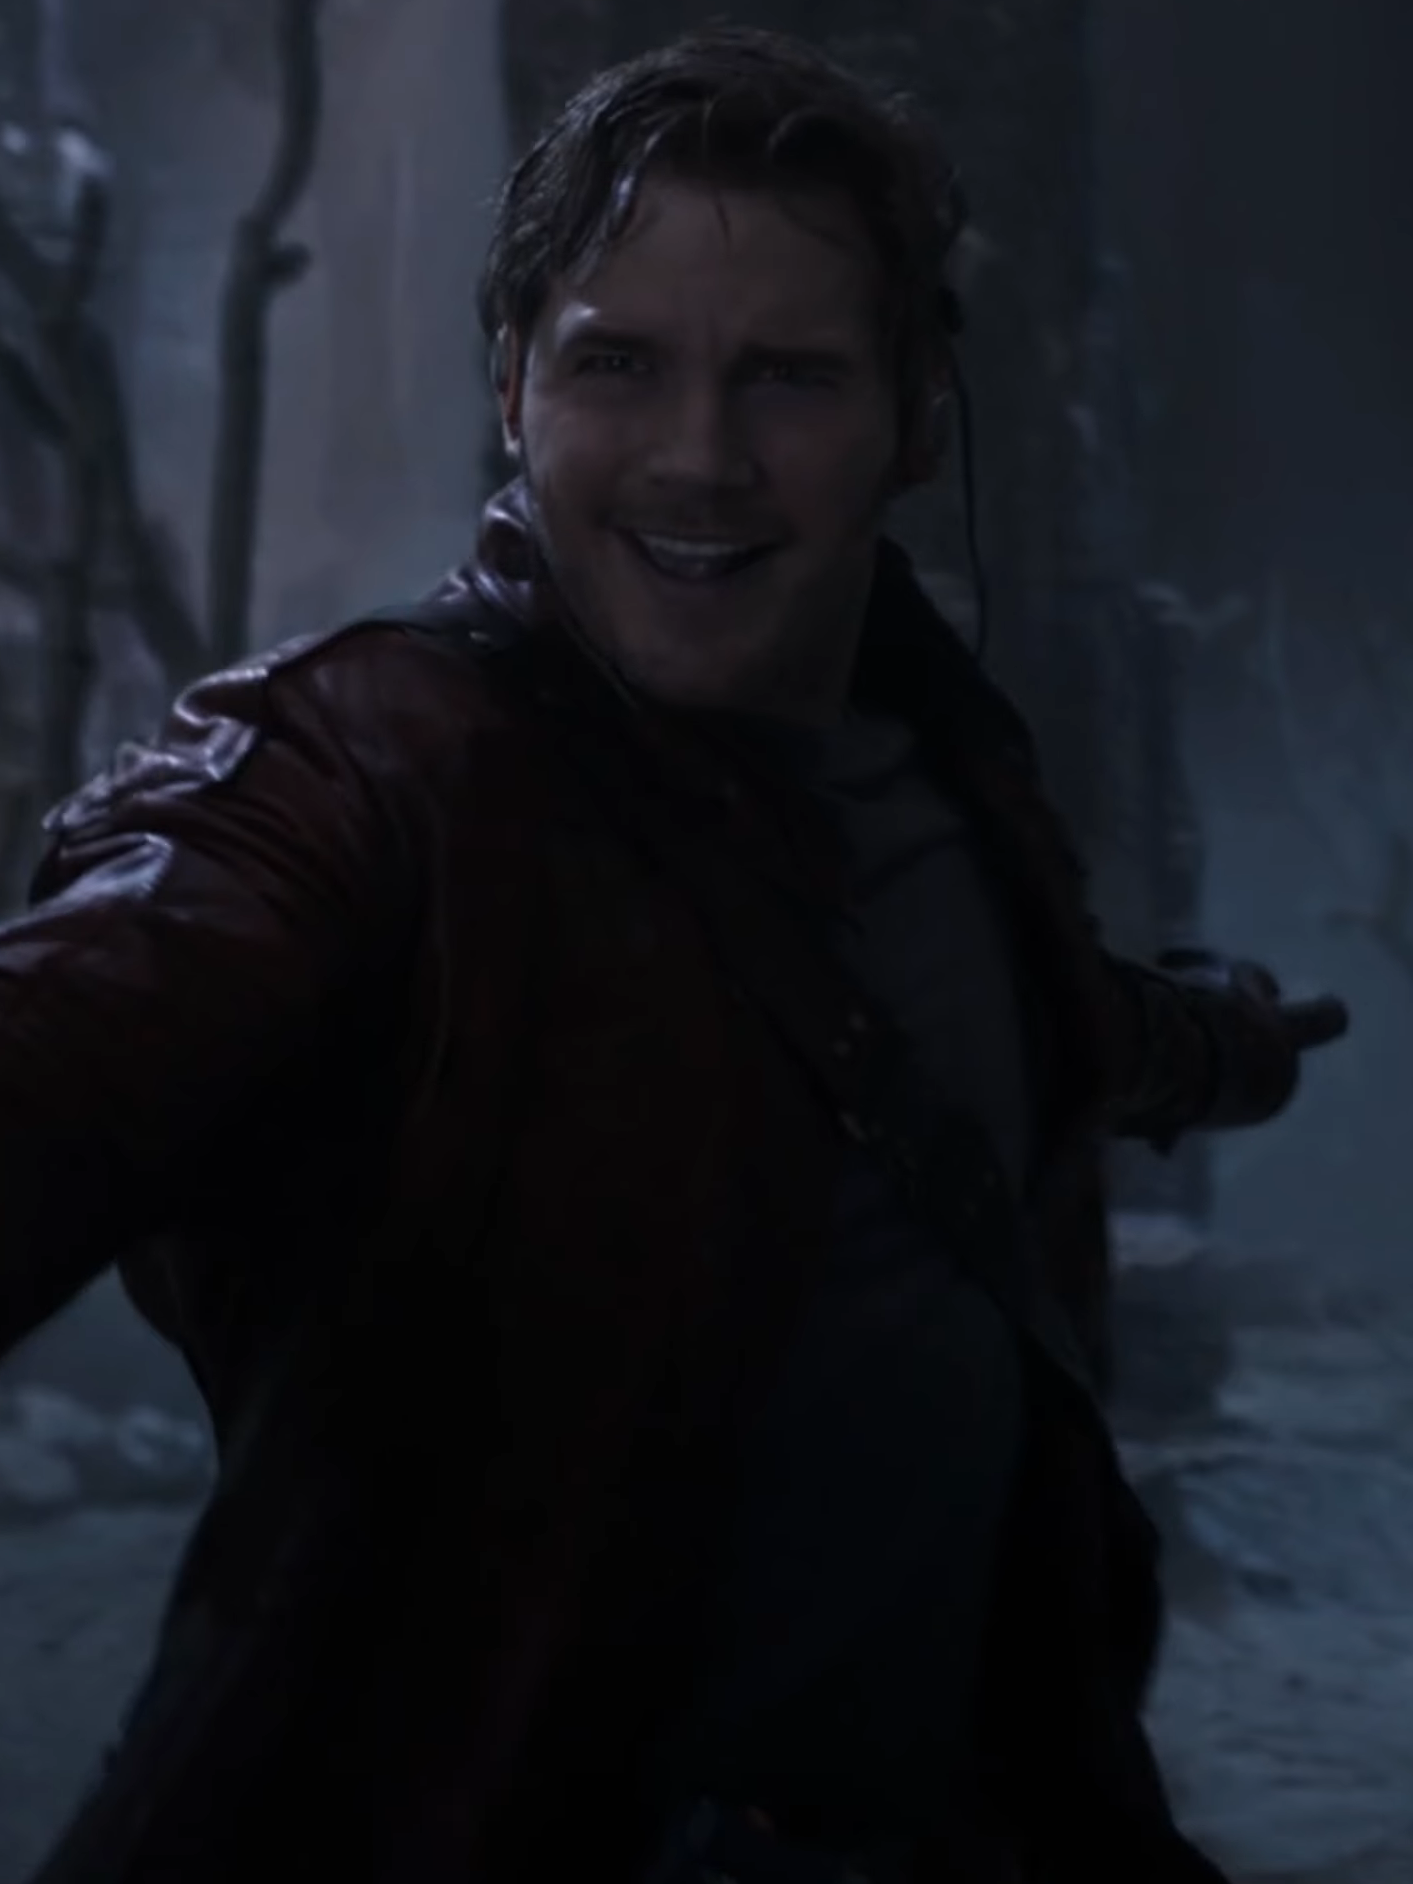 Peter Quill (Marvel Cinematic Universe) - Wikipedia